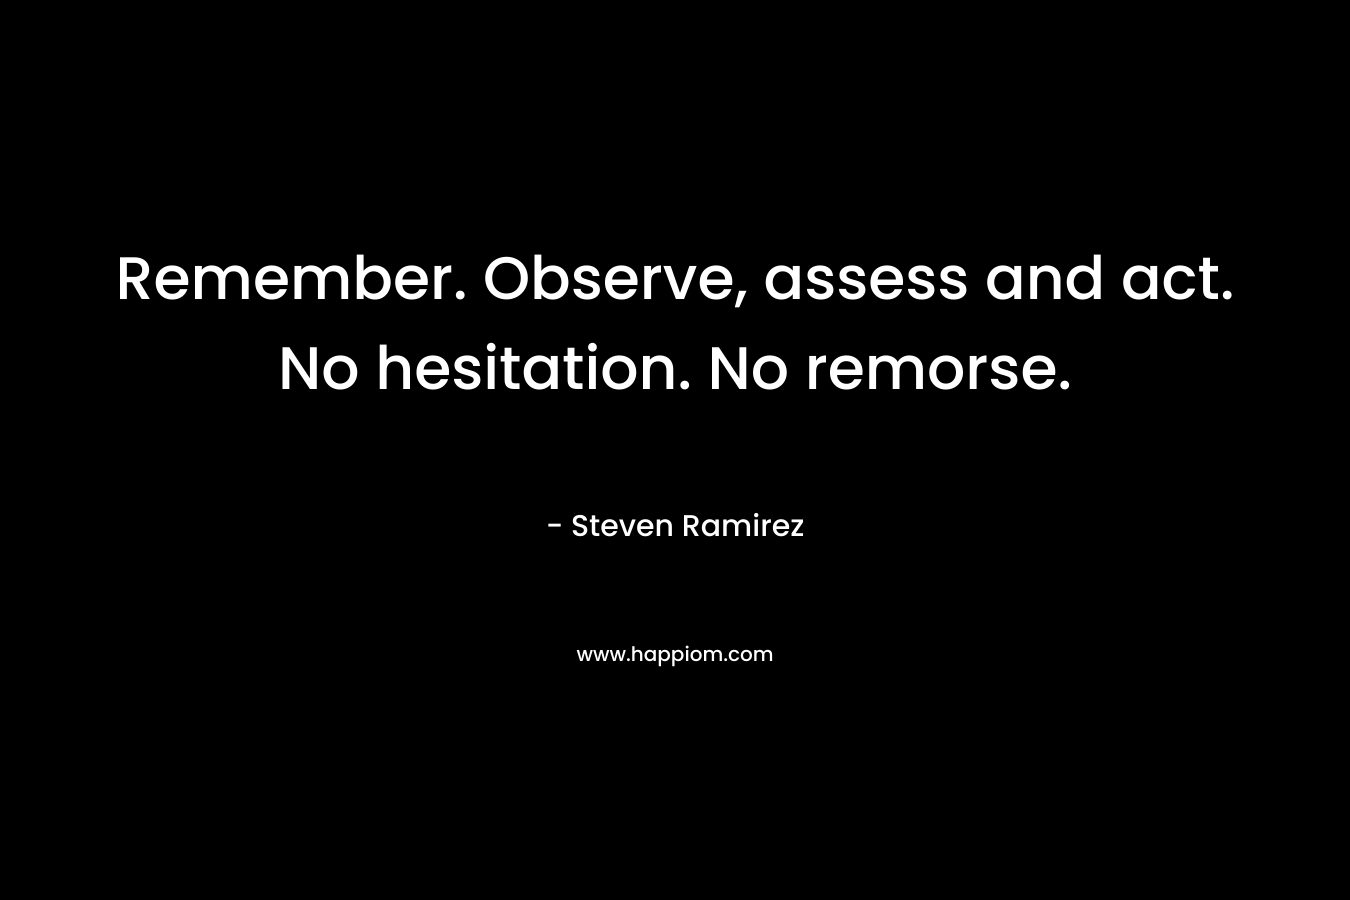 Remember. Observe, assess and act. No hesitation. No remorse.